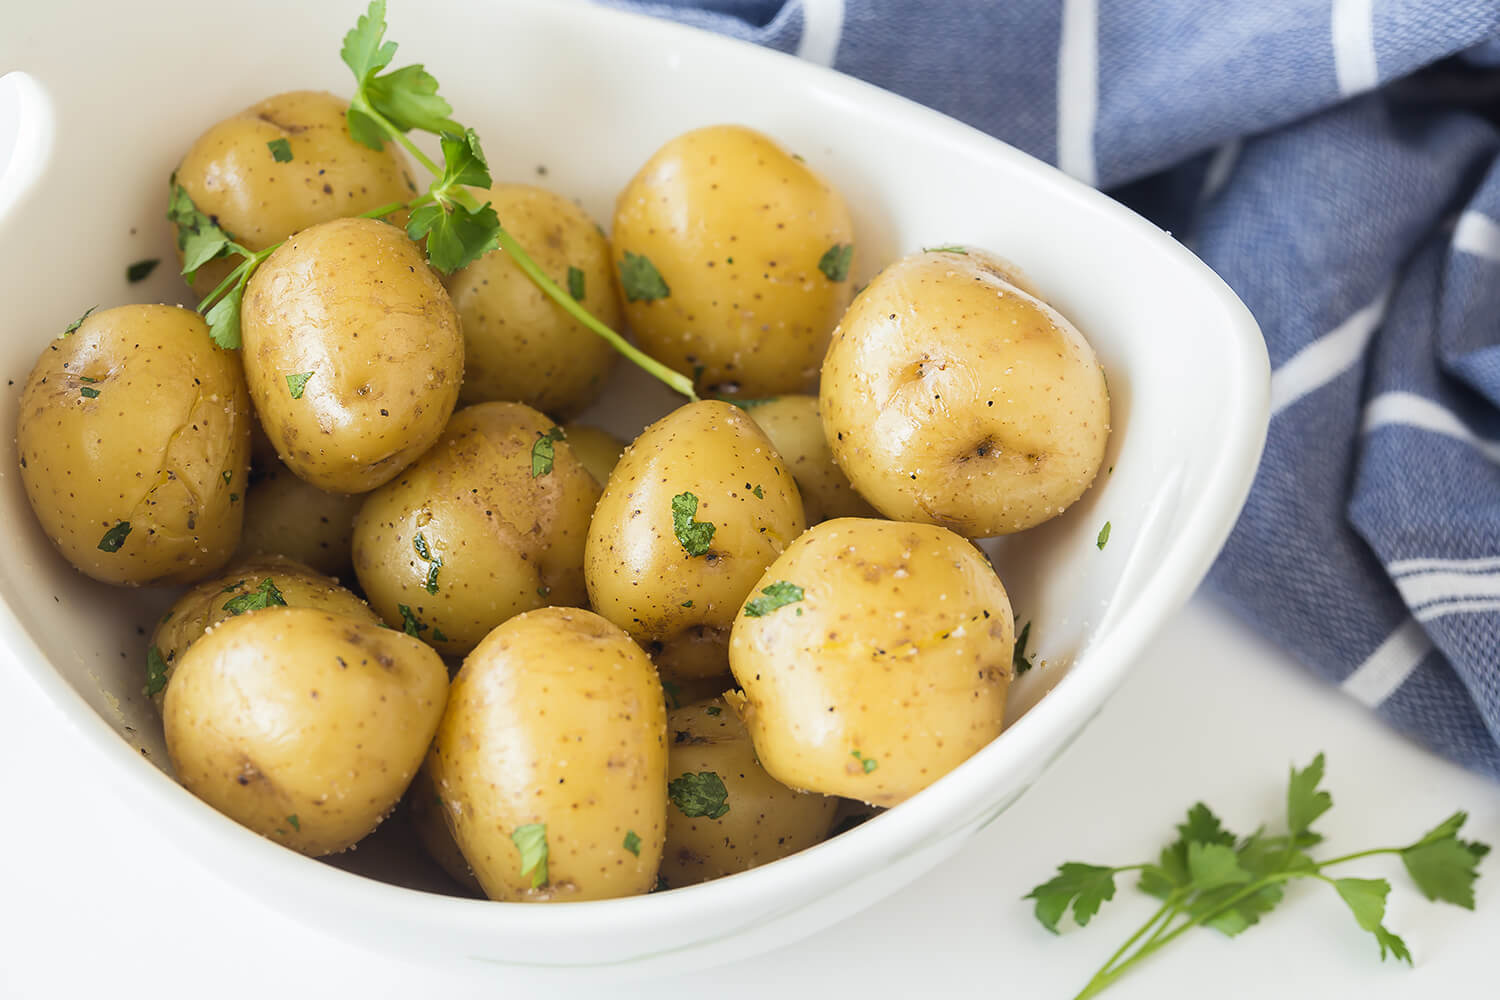 How long does it take to boil potatoes whole?